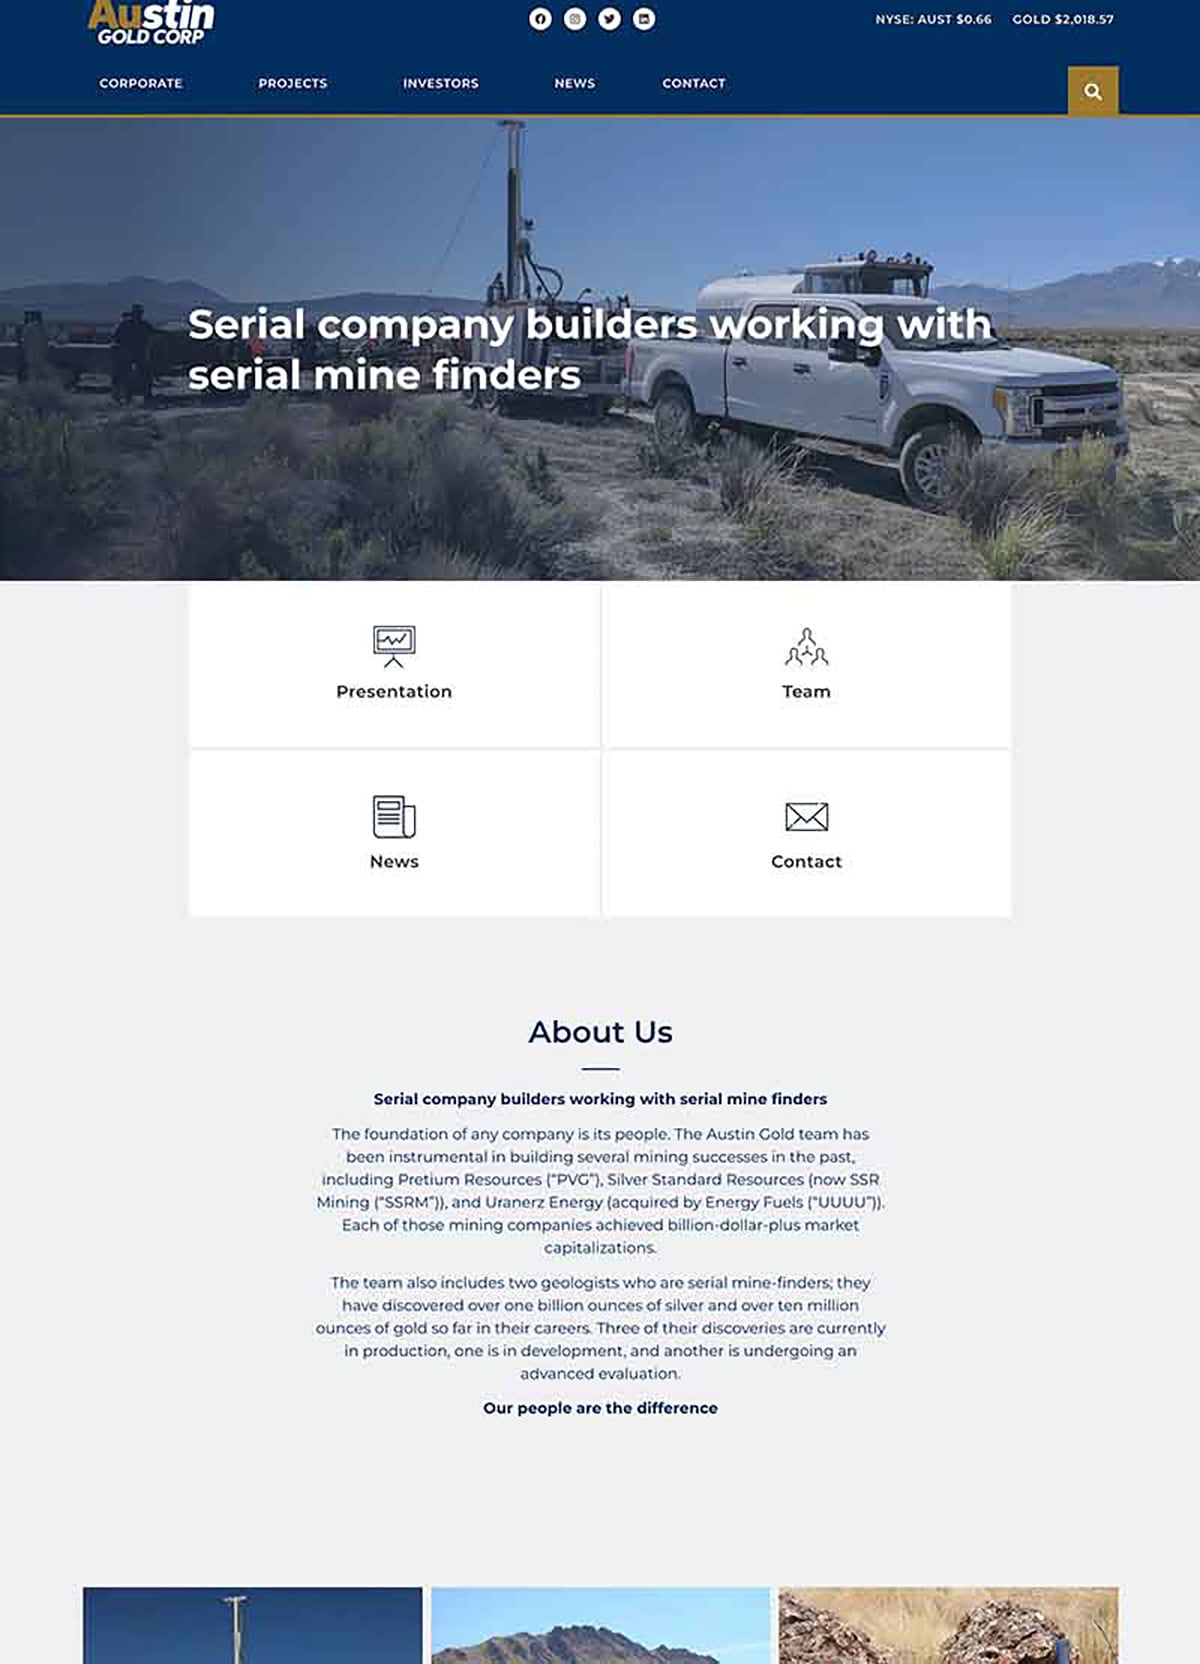 Austin Gold Corp Mockup Before Website Redesign